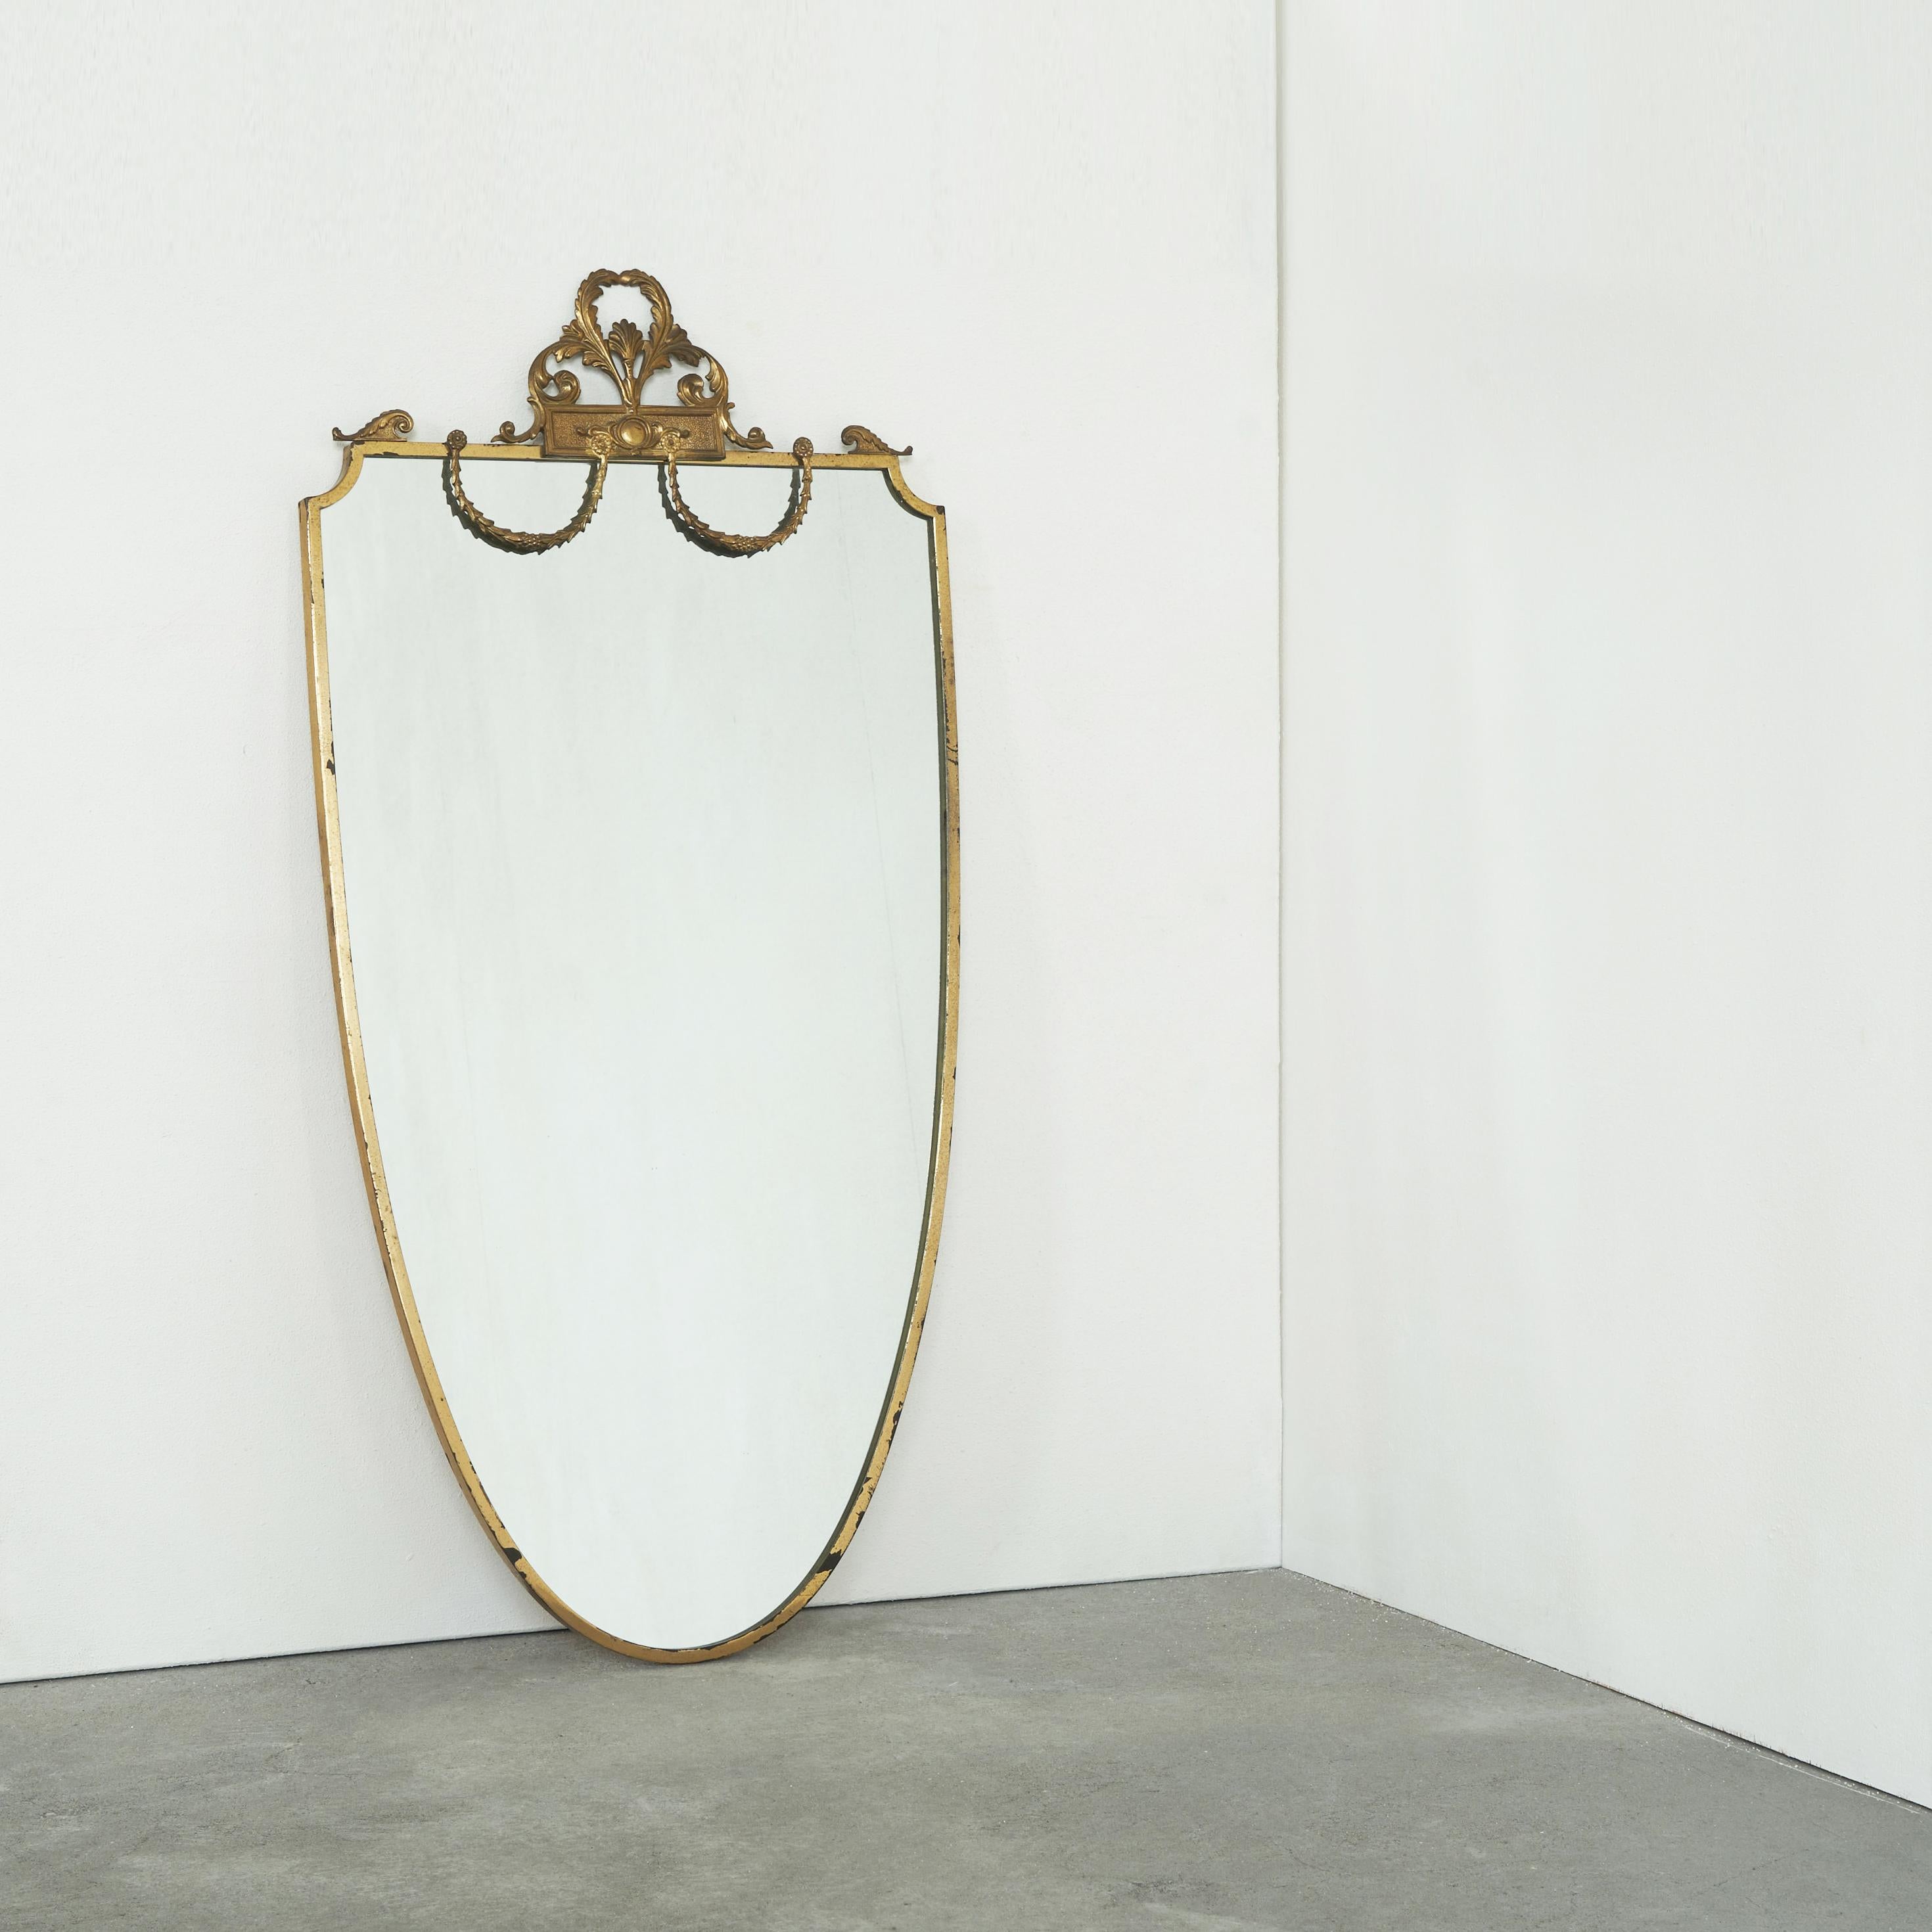 Hand-Crafted Elegant Mid Century Neoclassical Mirror in Patinated Brass